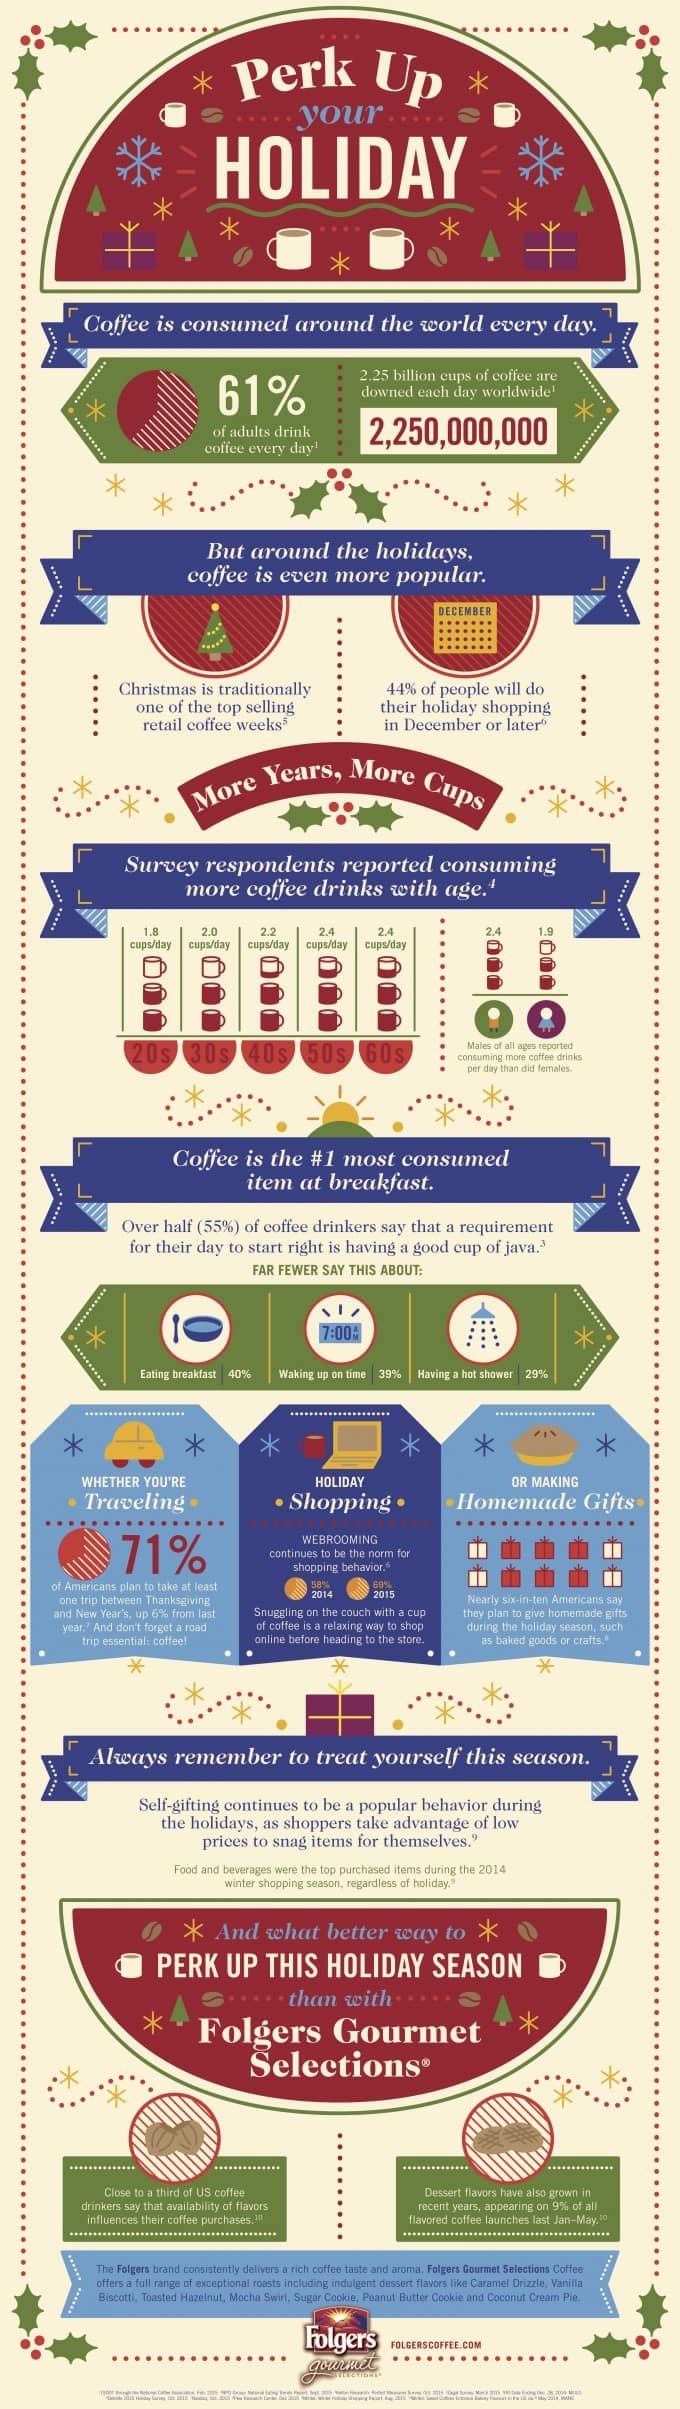 Folgers Infographic_FINAL_11302015160046